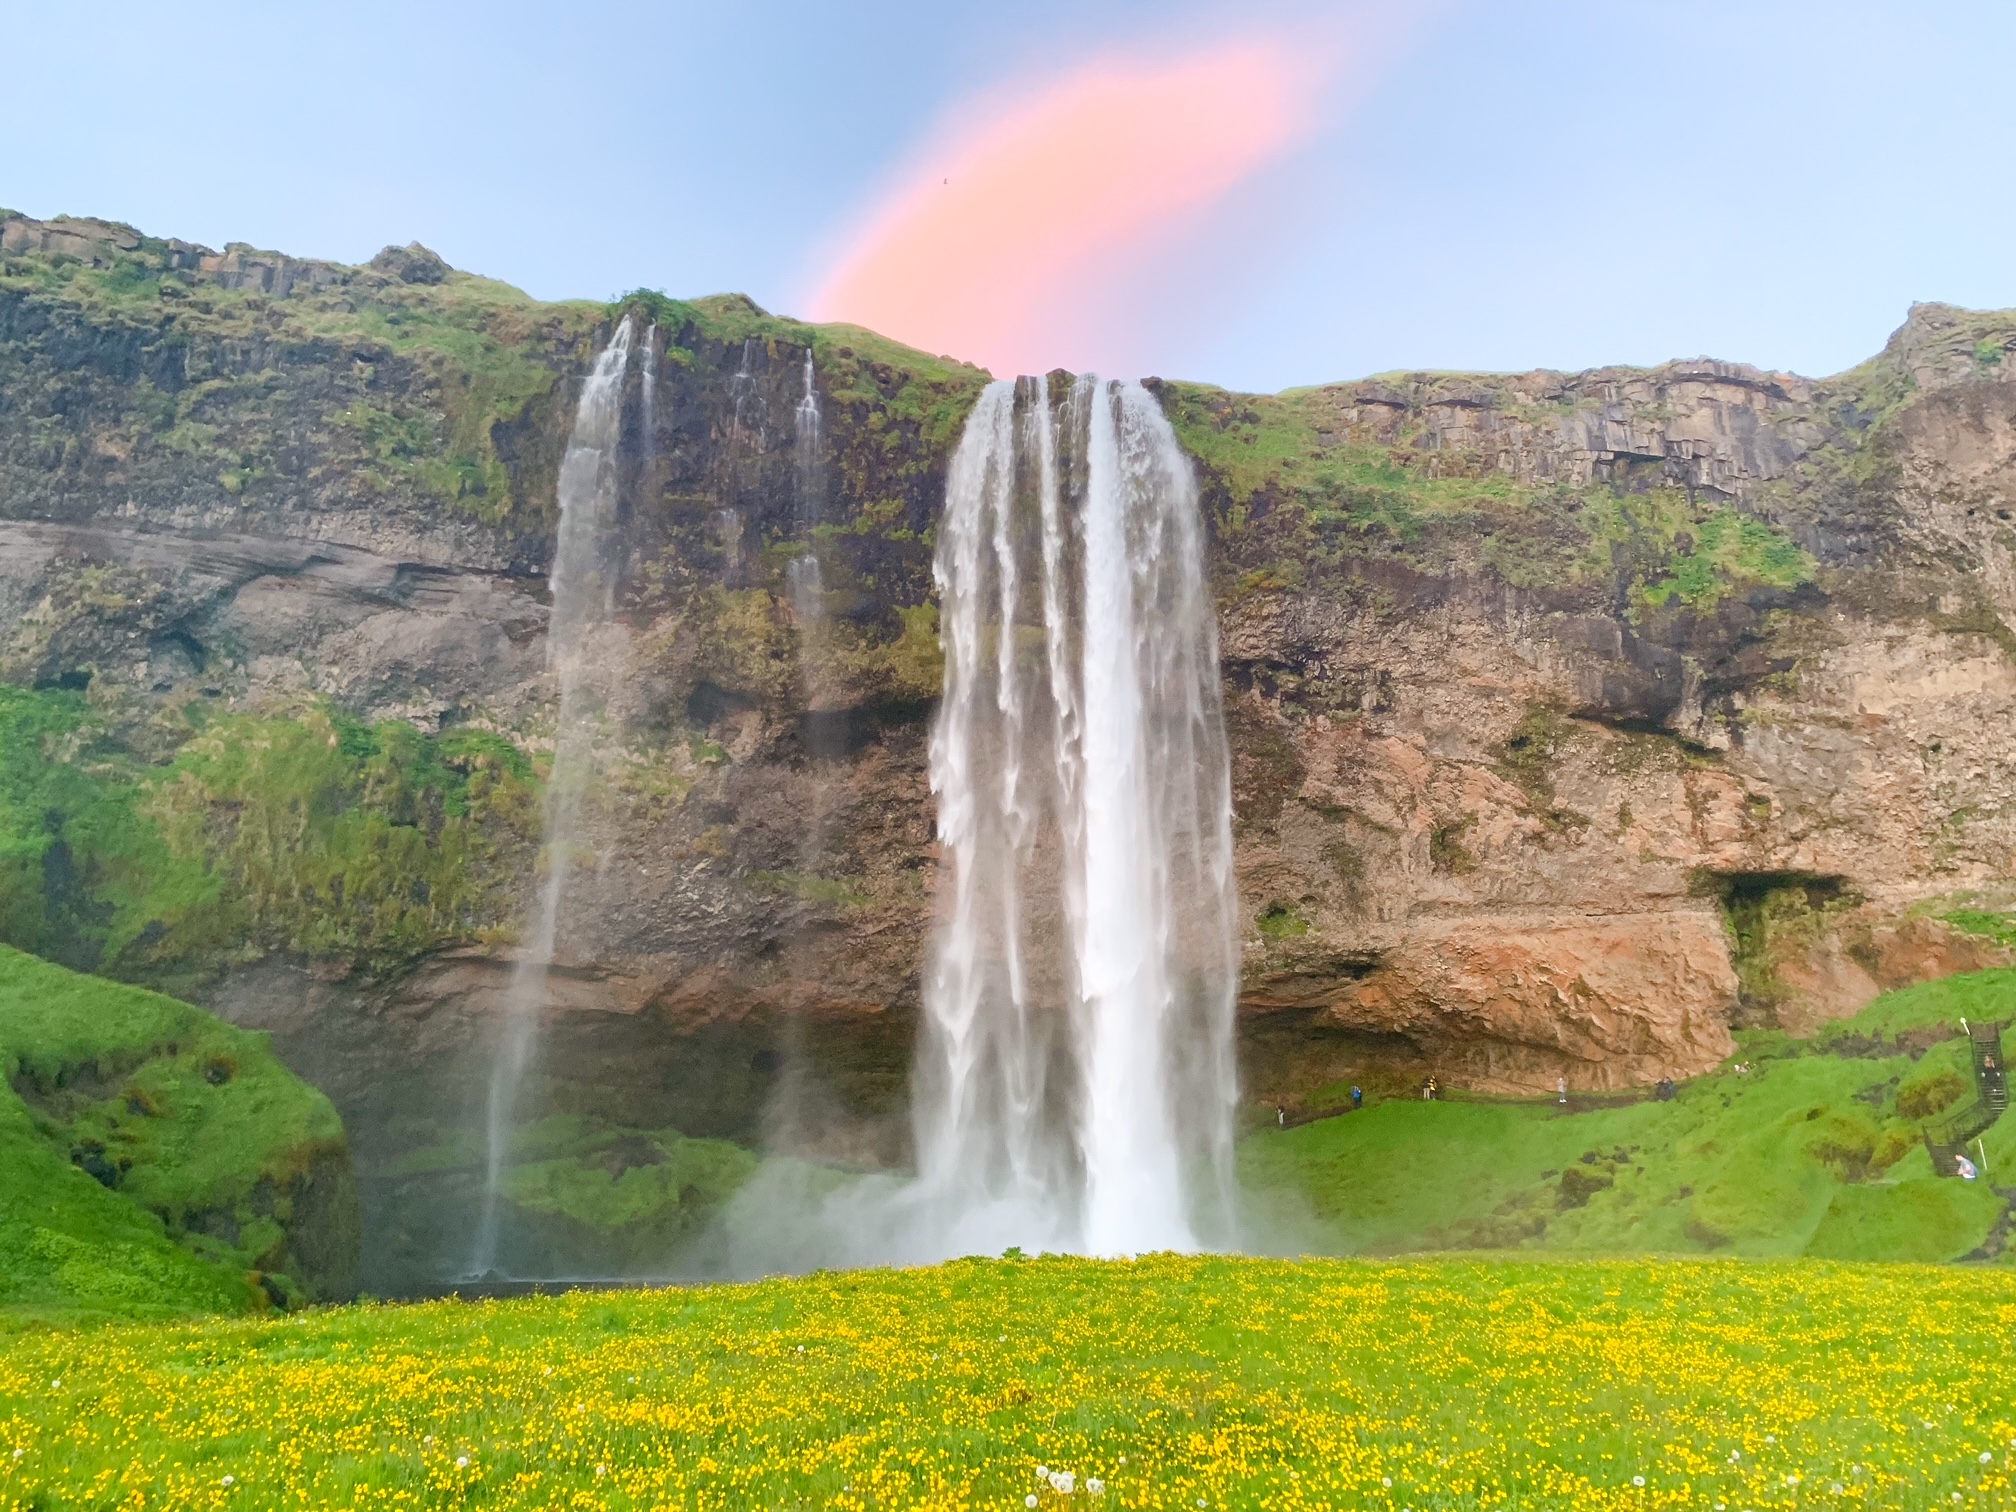 A waterfall crashing over the side of a rocky cliff with grass growing on it. There is a field with yellow flowers in front of the waterfall. 